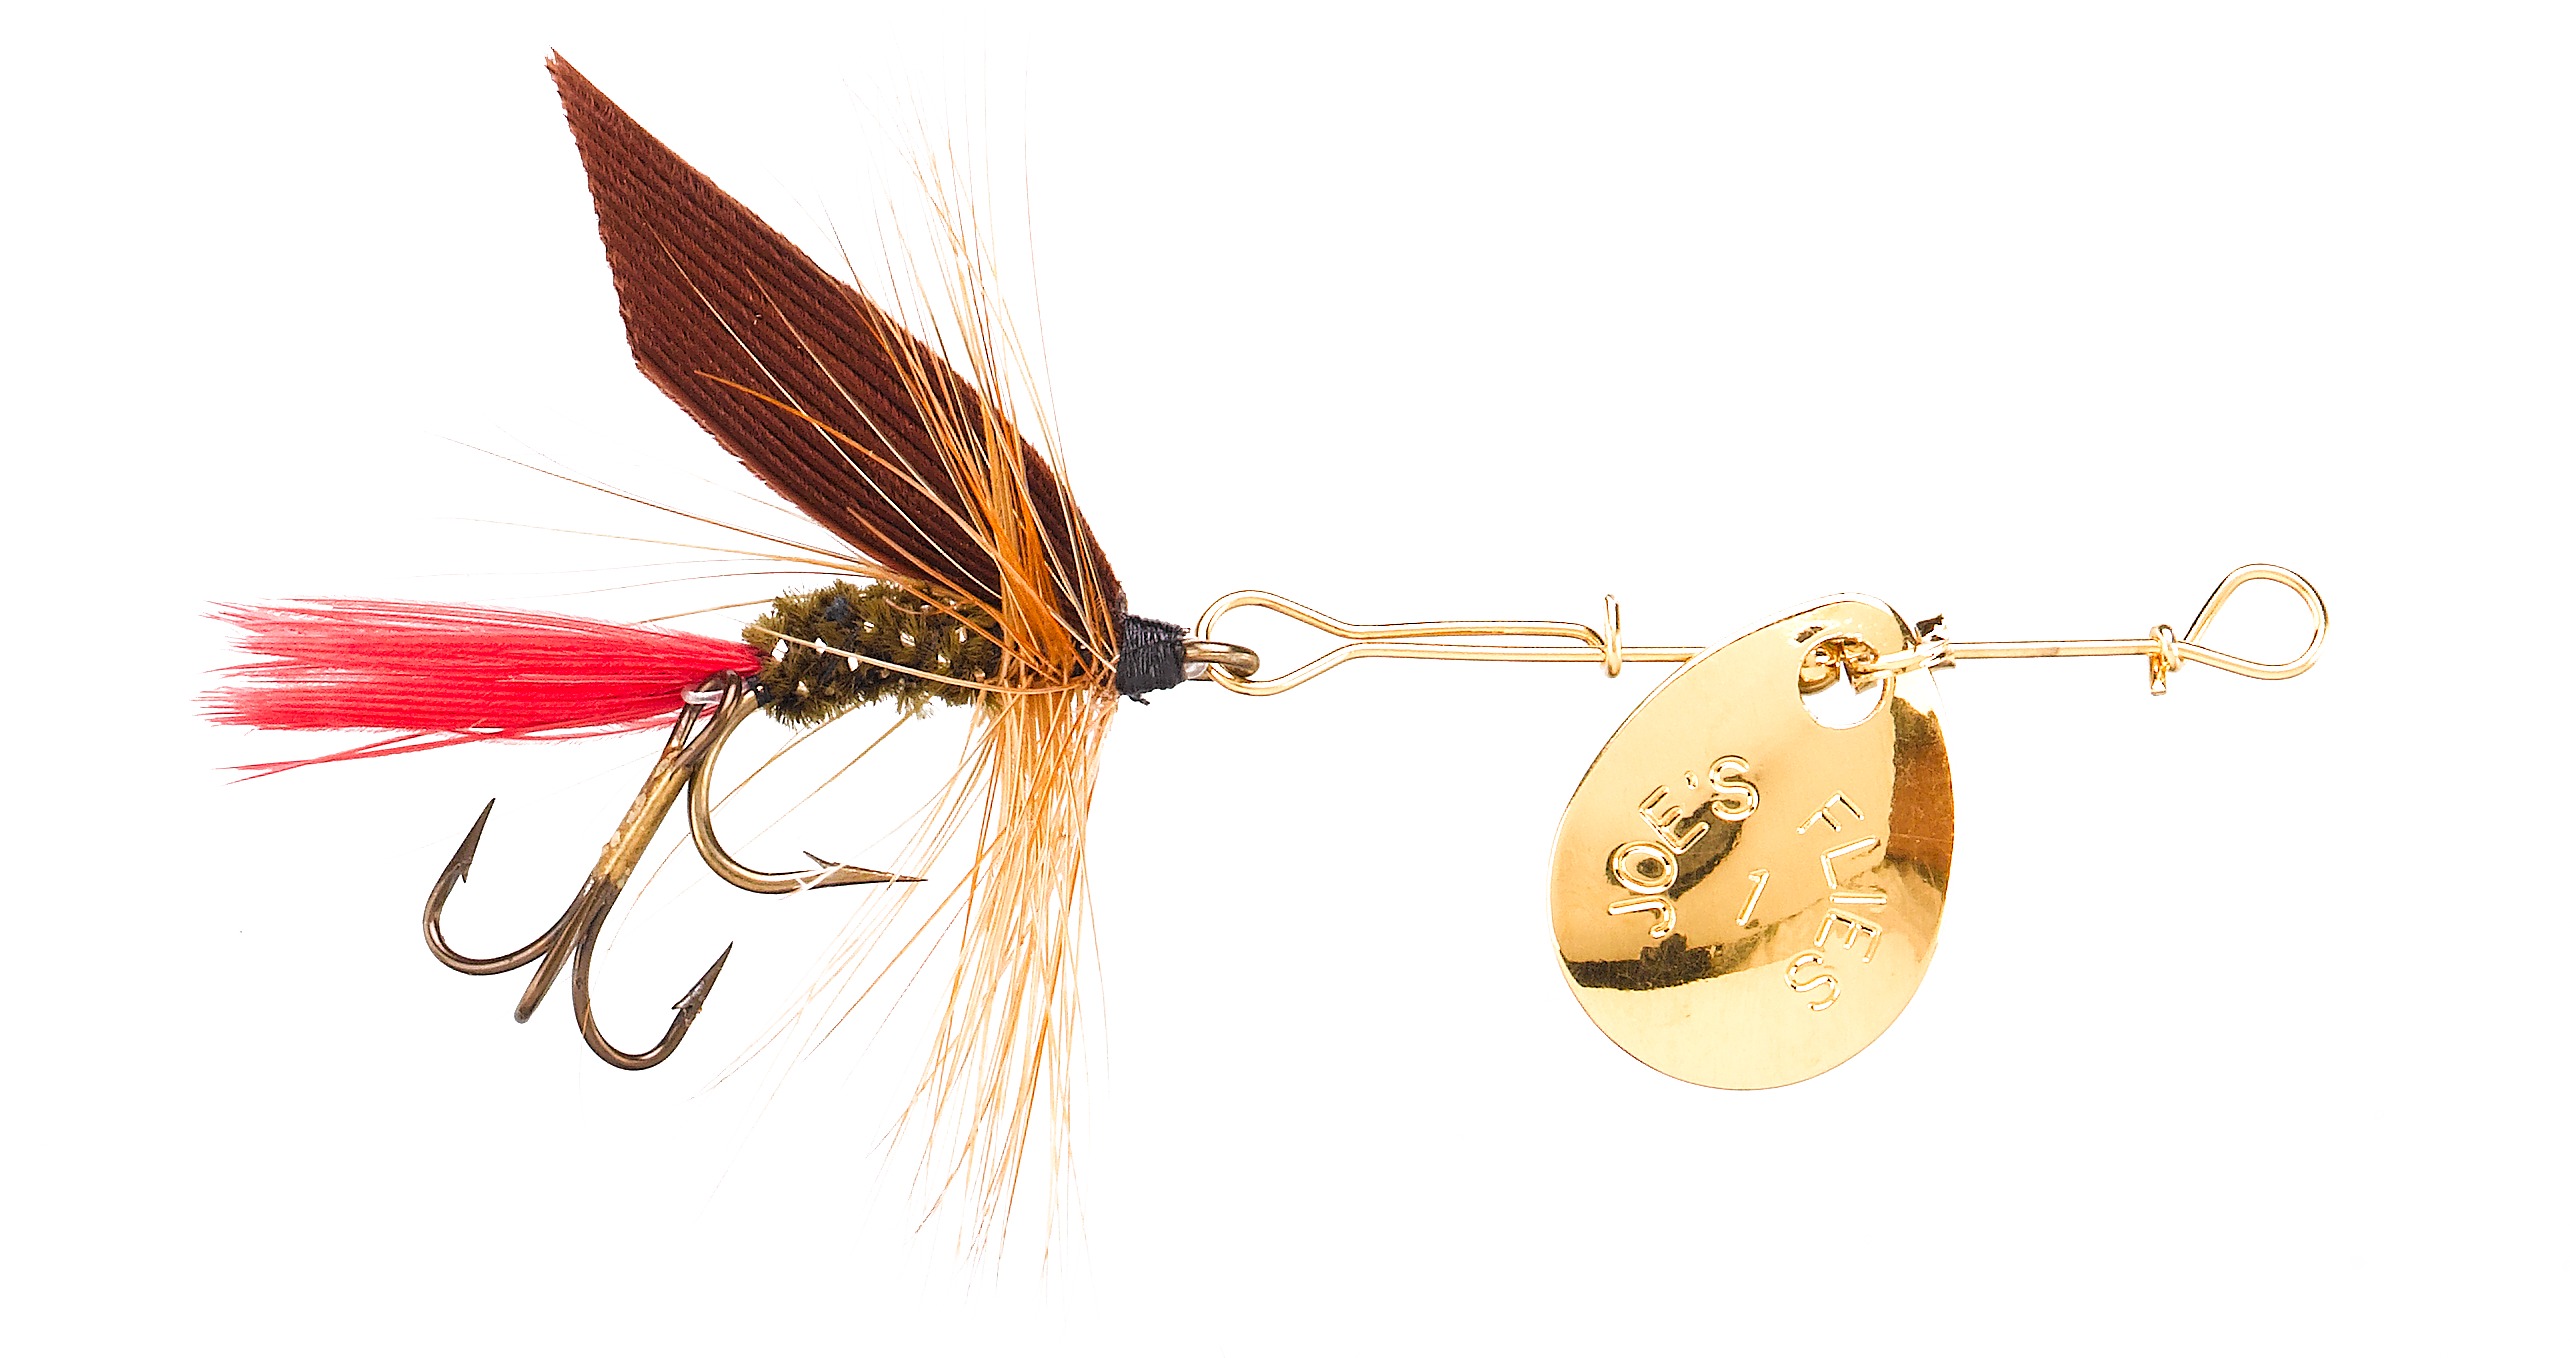 Joes 215-8 Short Striker Classic In-Line Spinner Fly, Sz 8, Trout